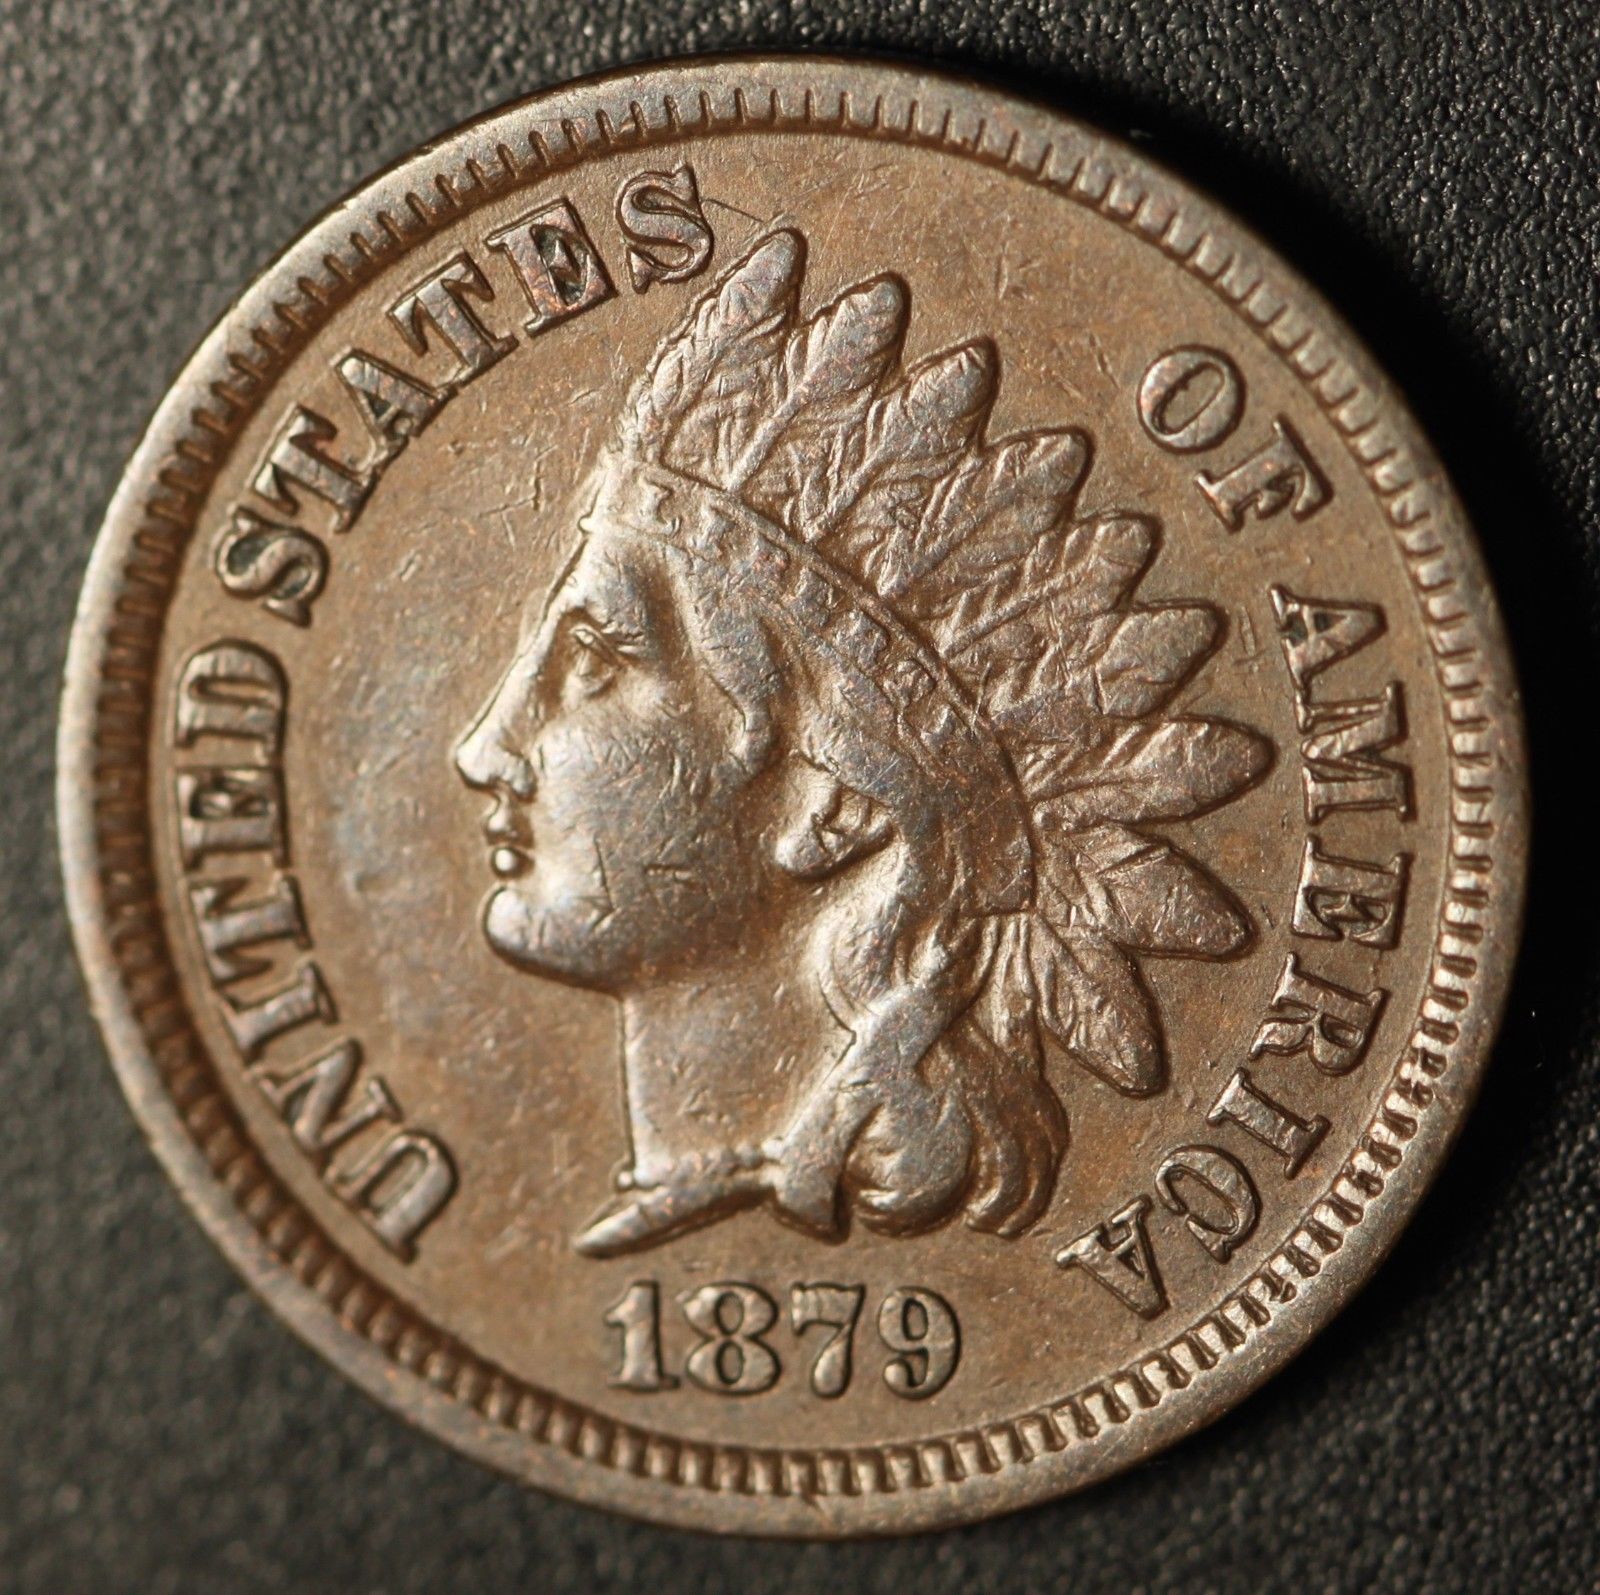 1879 RPD-004 - Indian Head Penny - Photo by Ed Nathanson